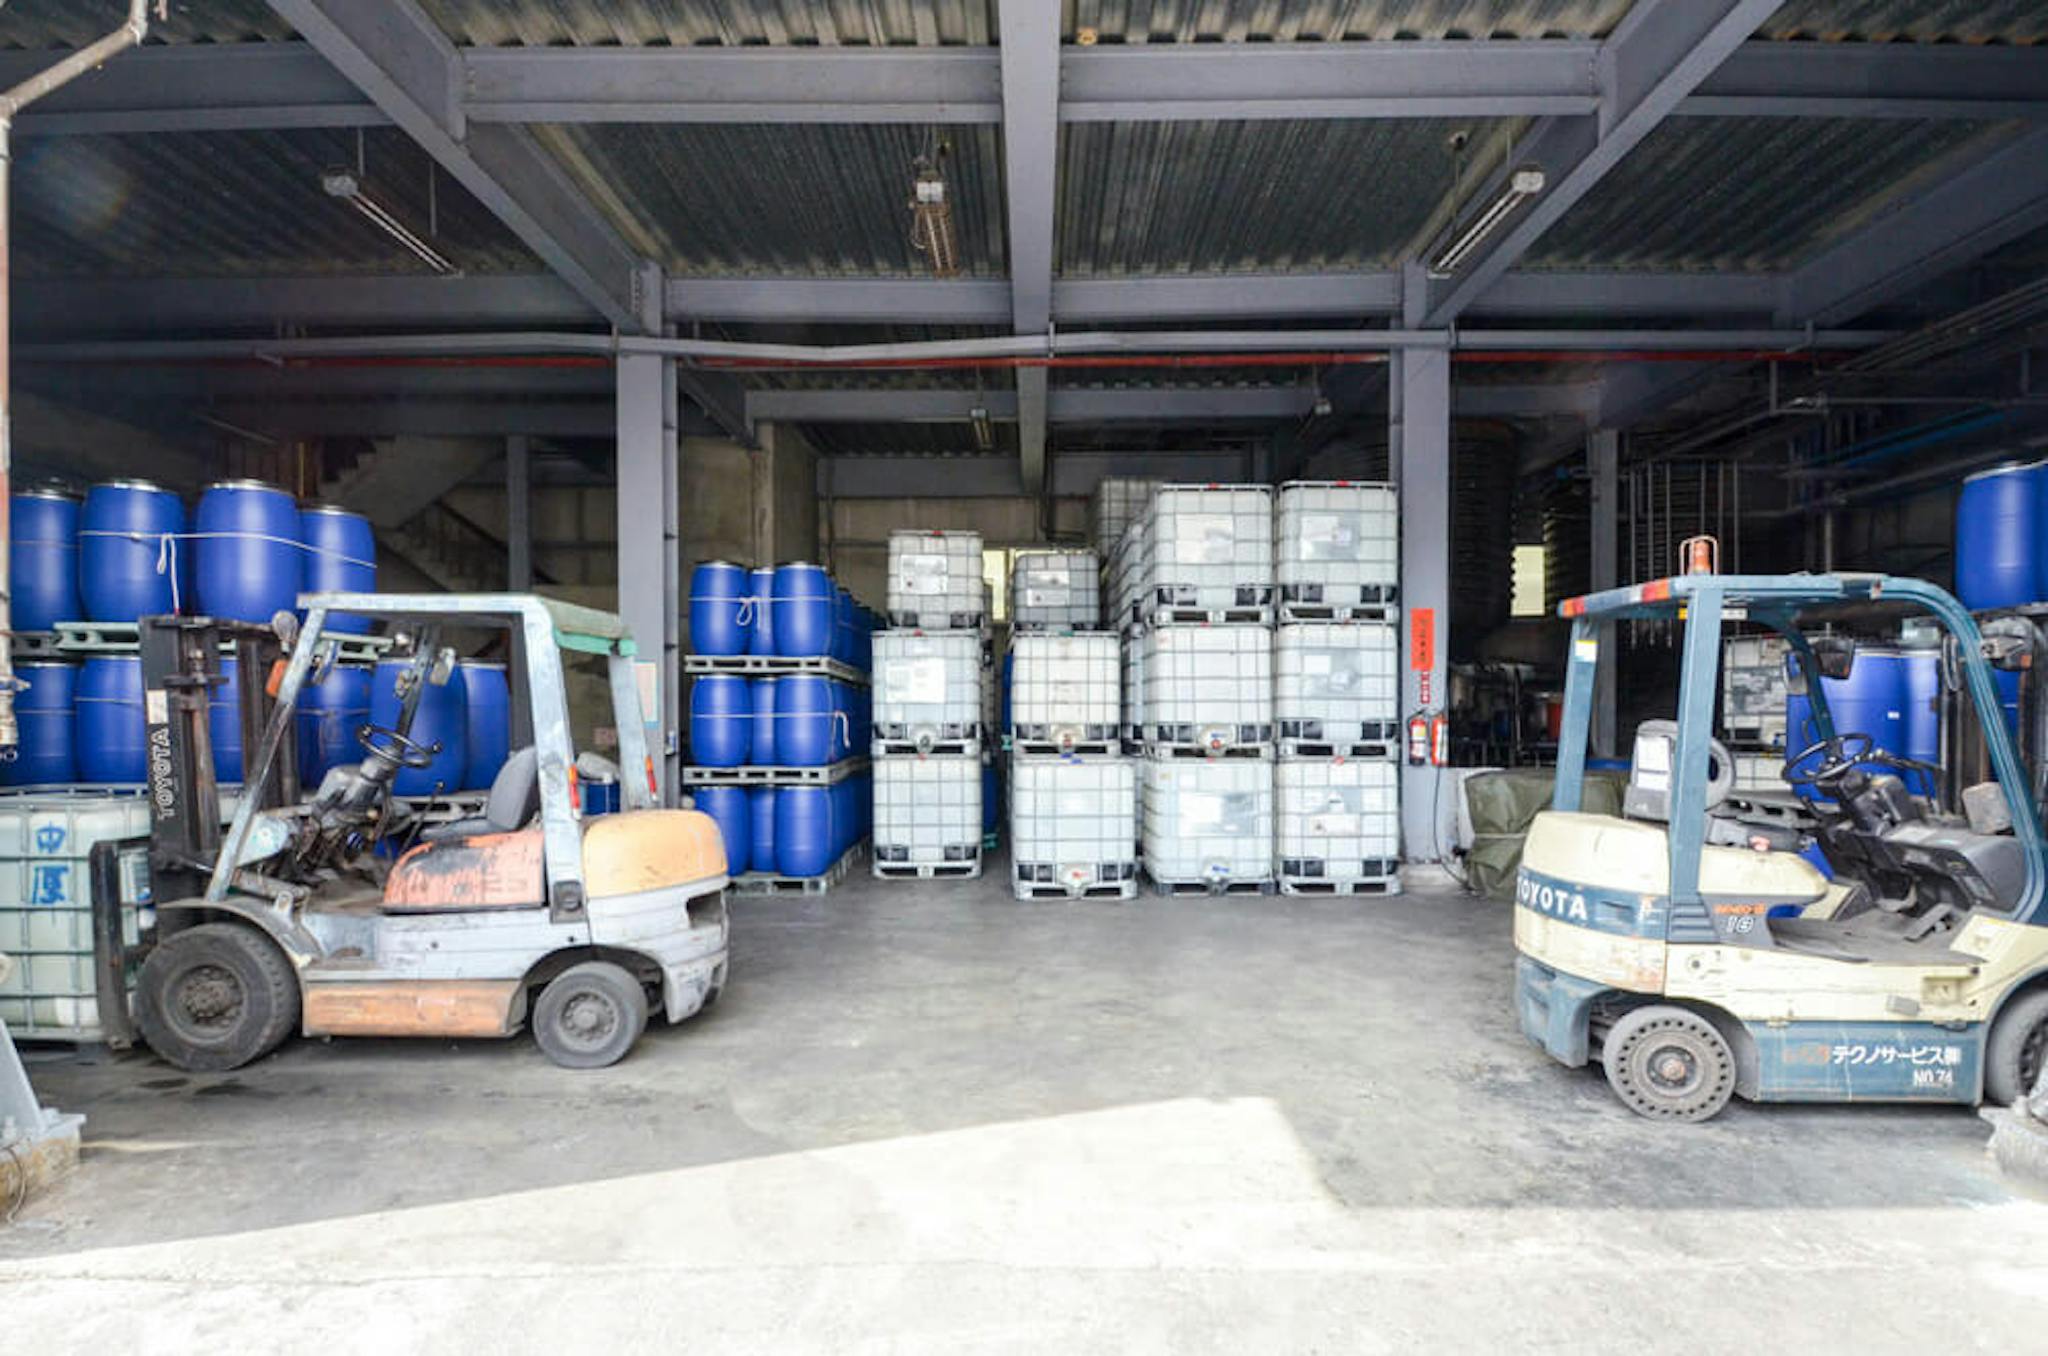 Forklifts and inventory